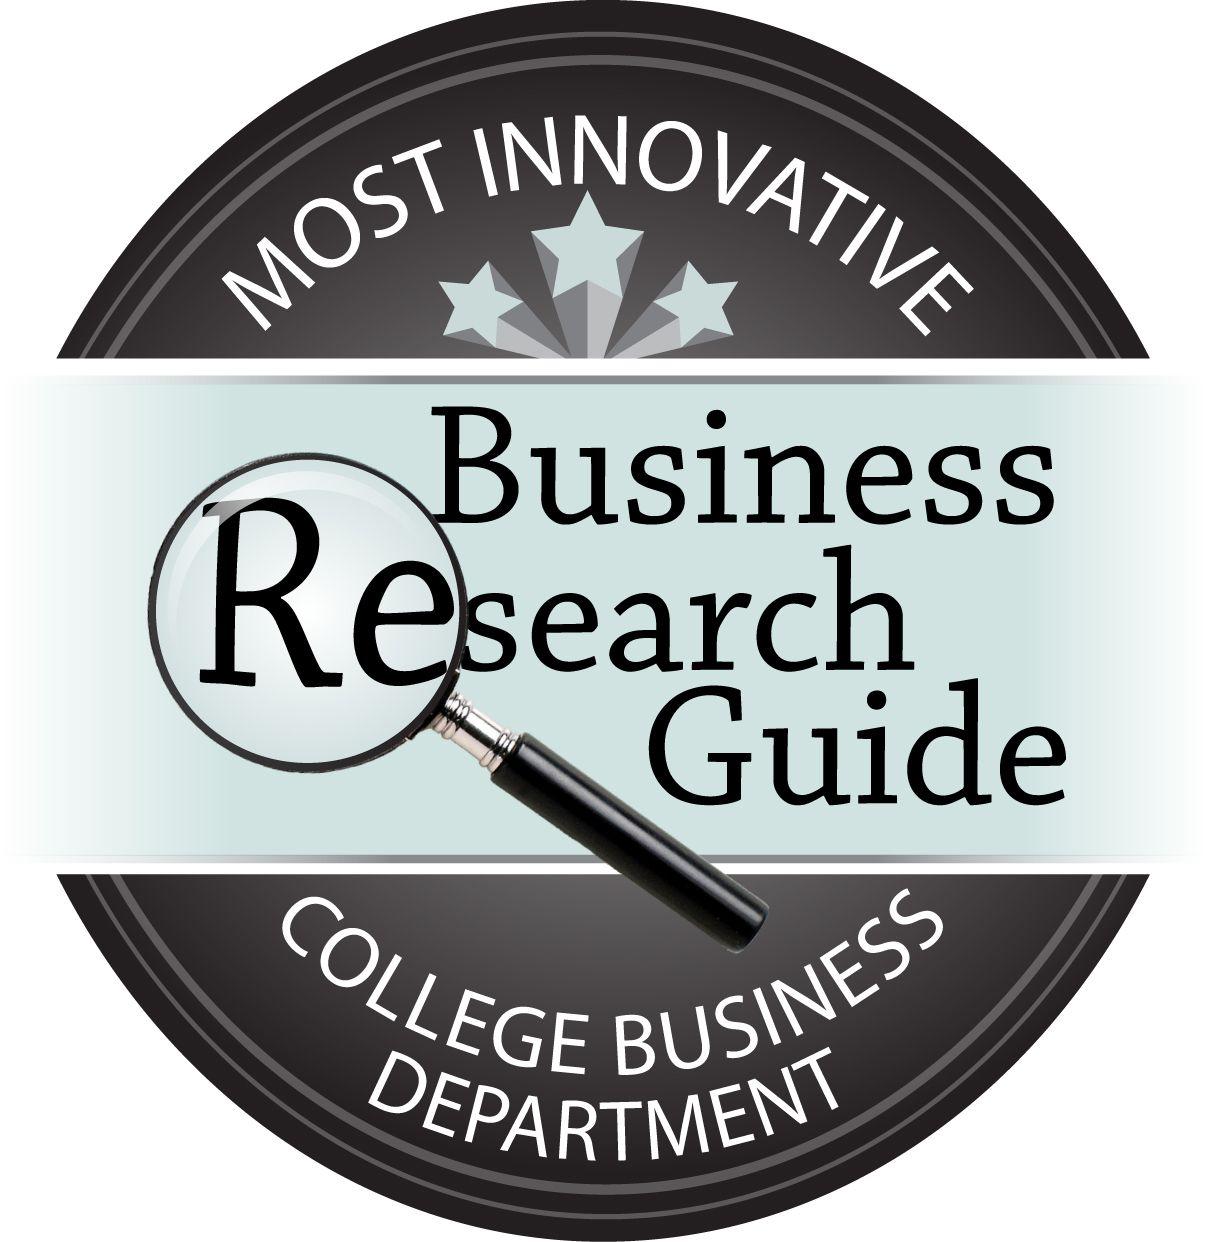 Business Department Logo - Most Innovative Small College Business Departments 2015